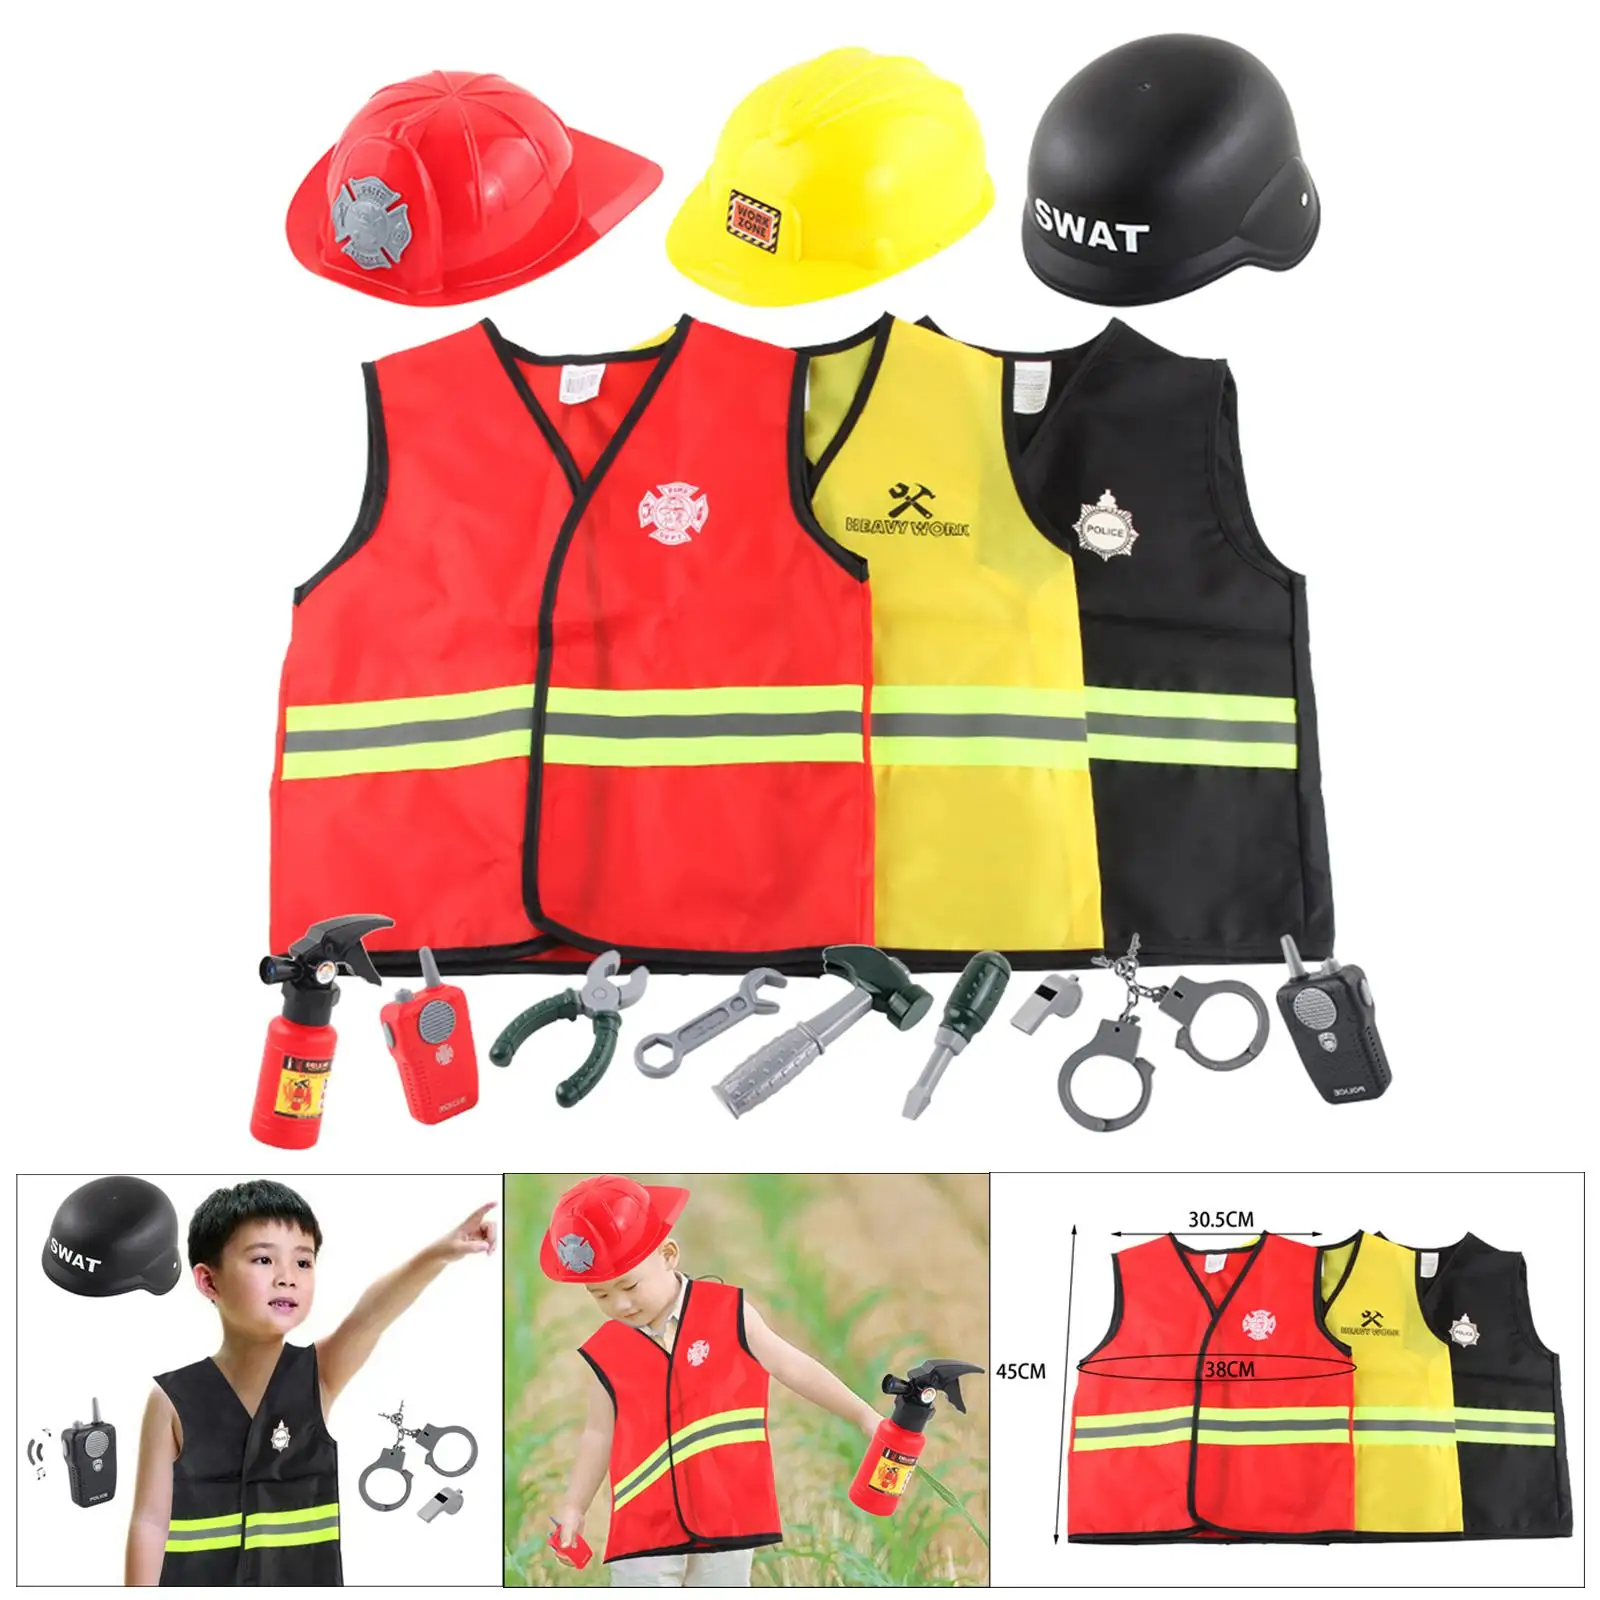 Fireman Costume  Uniform Construction Worker Costume Toy Set for Party